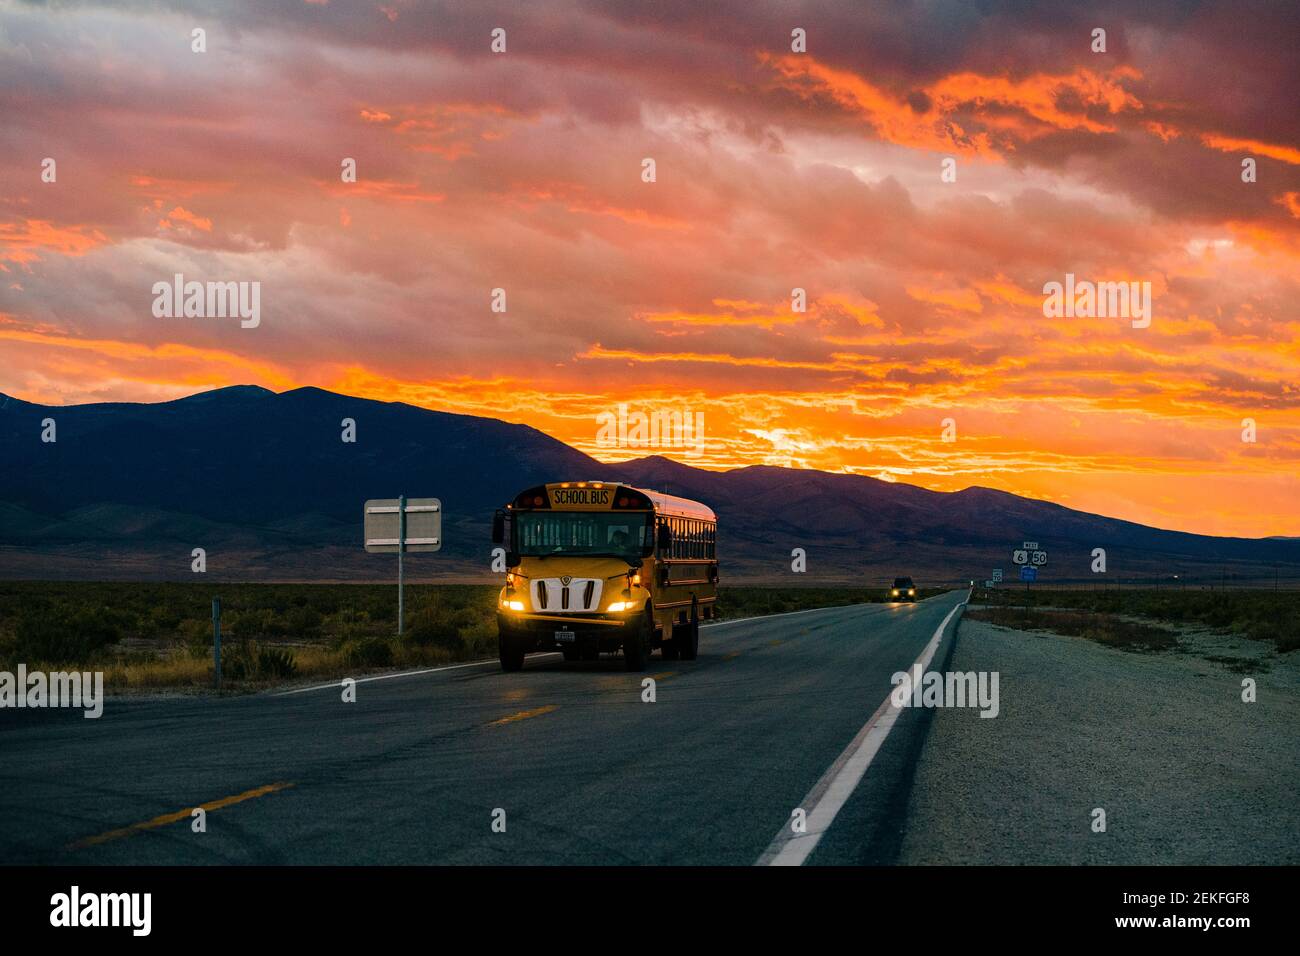 School bus on highway at sunset, Great Basin National Park, Nevada, USA Stock Photo